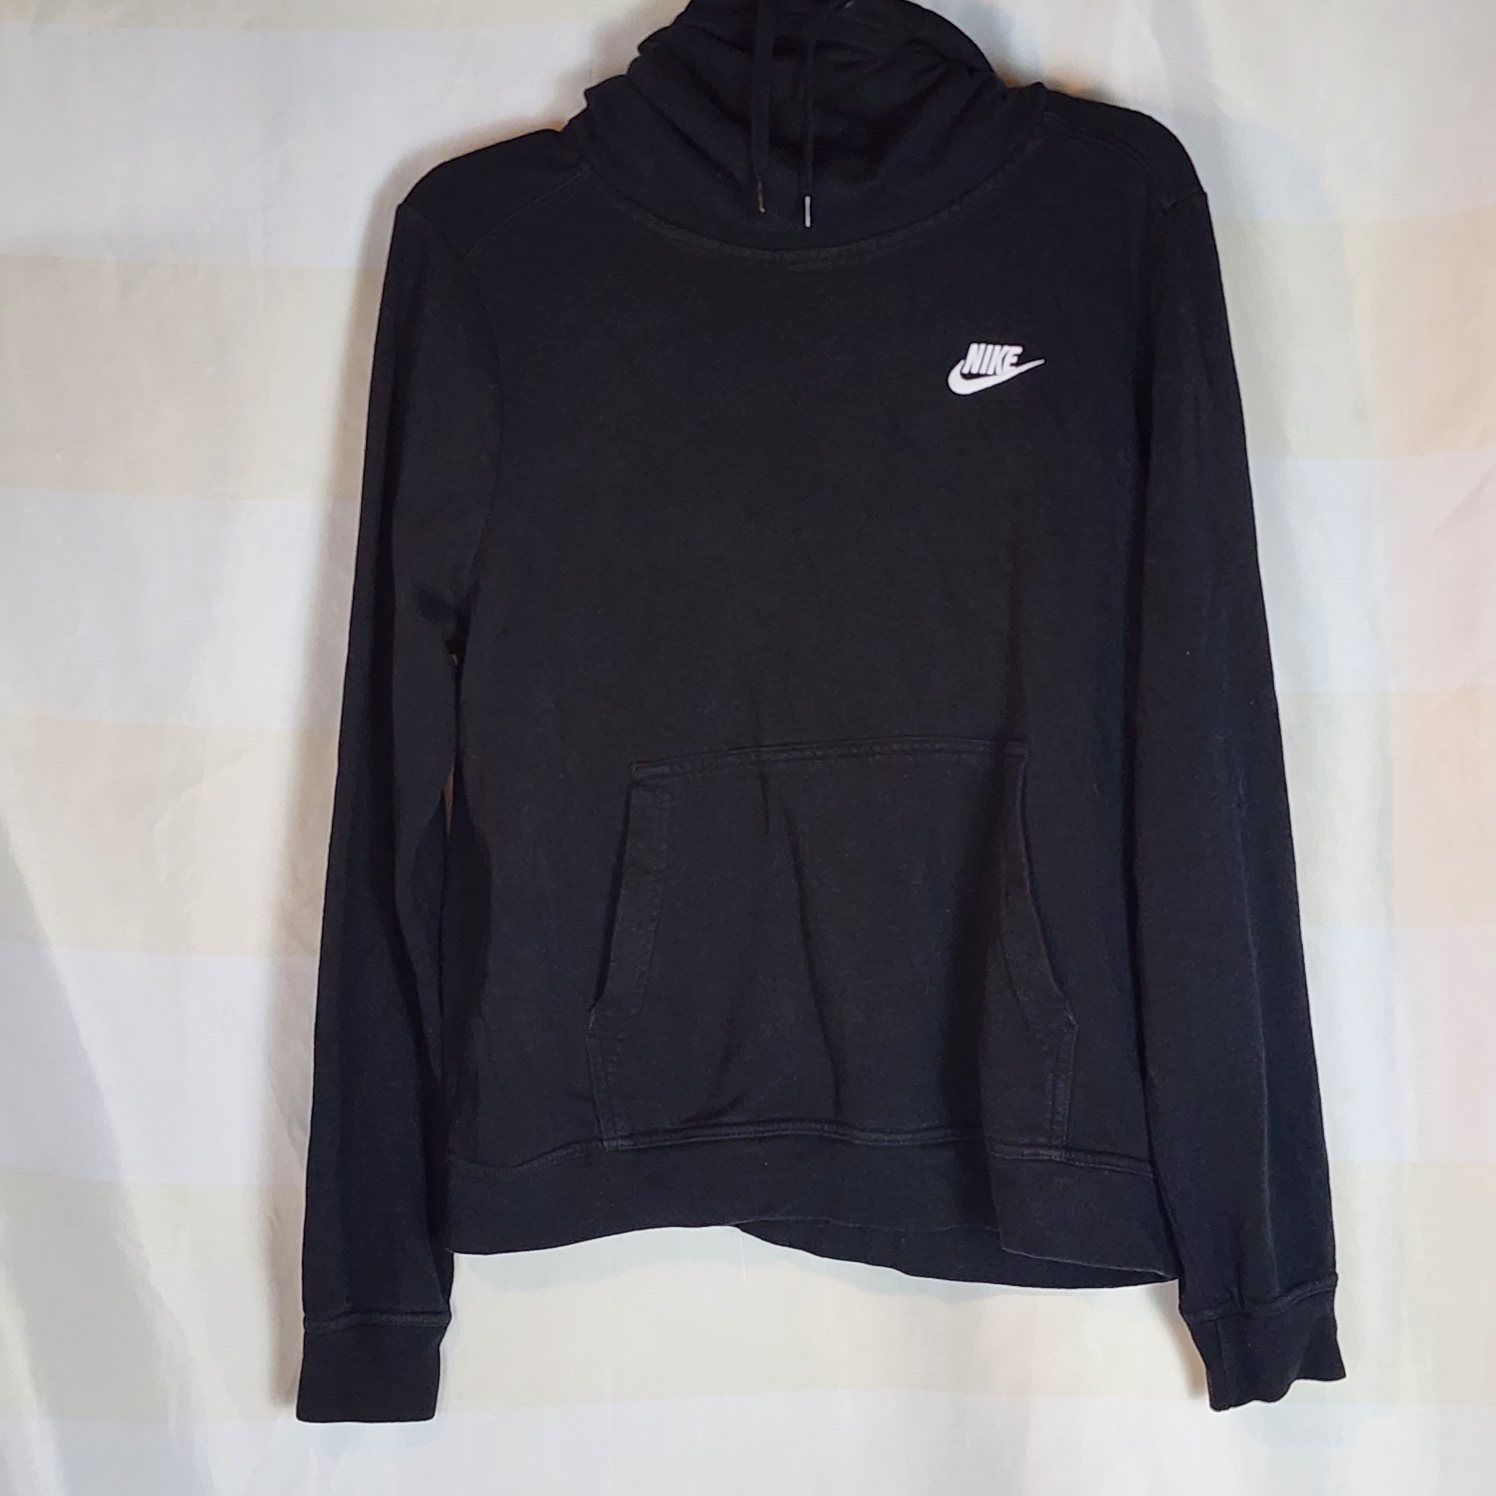 Nike Black with White Logo Funnel Neck Womens Fleece Lined Pullover Hoodie Size M